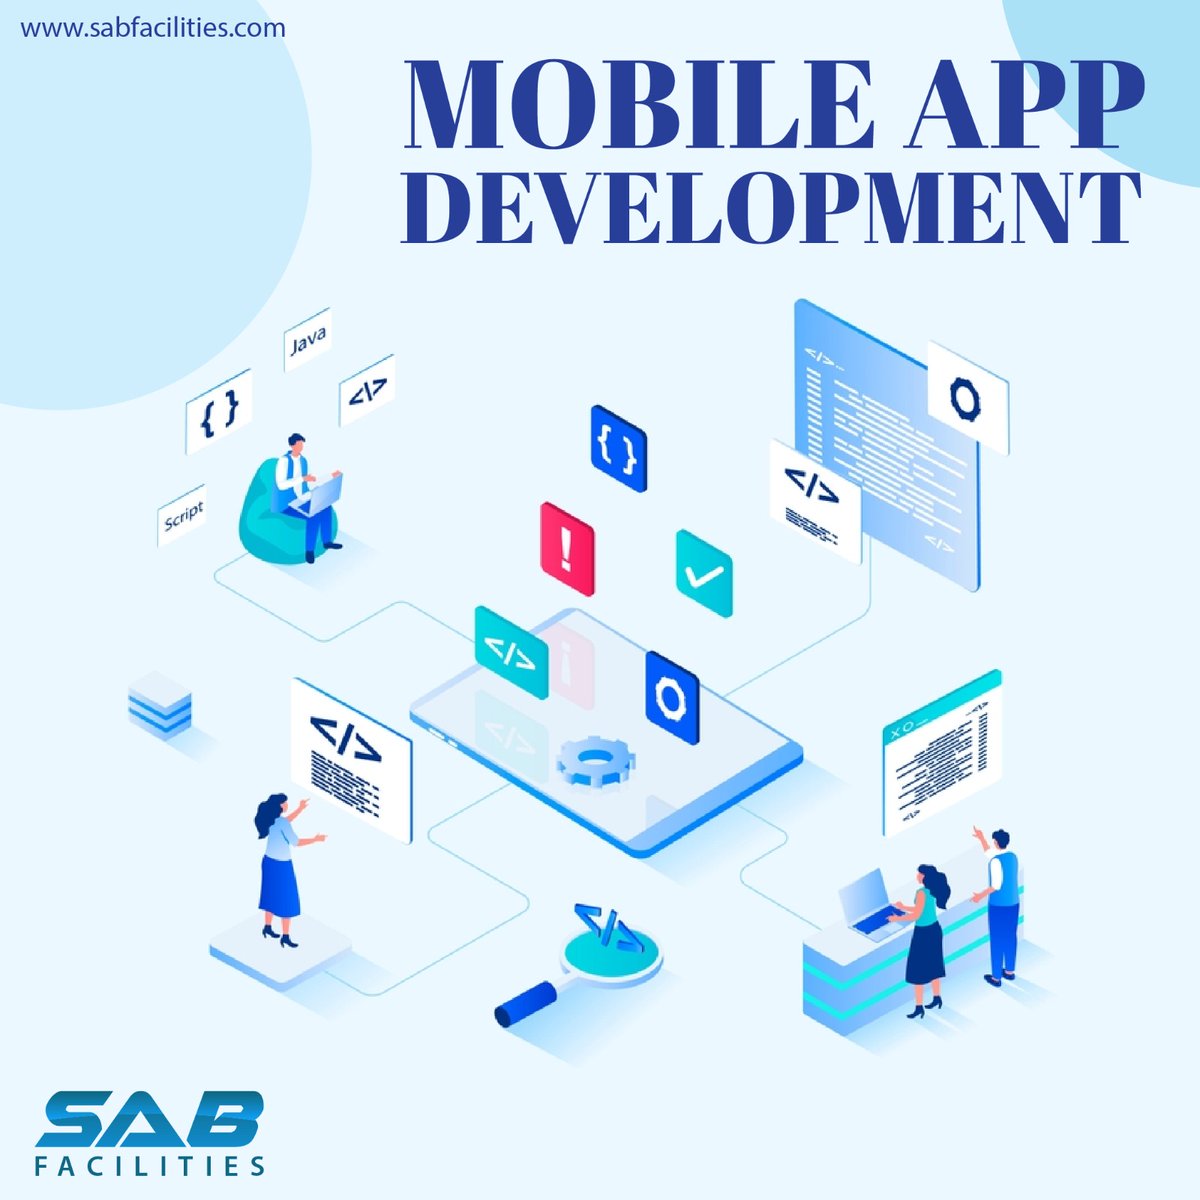 Unlock limitless possibilities with our mobile app development expertise! From concept to launch, we craft innovative and user-friendly apps that elevate your brand. Stay connected with your audience anytime, anywhere. 📱
.
.
#mobileappdevelopment #sabfacilities #mobileappdesign